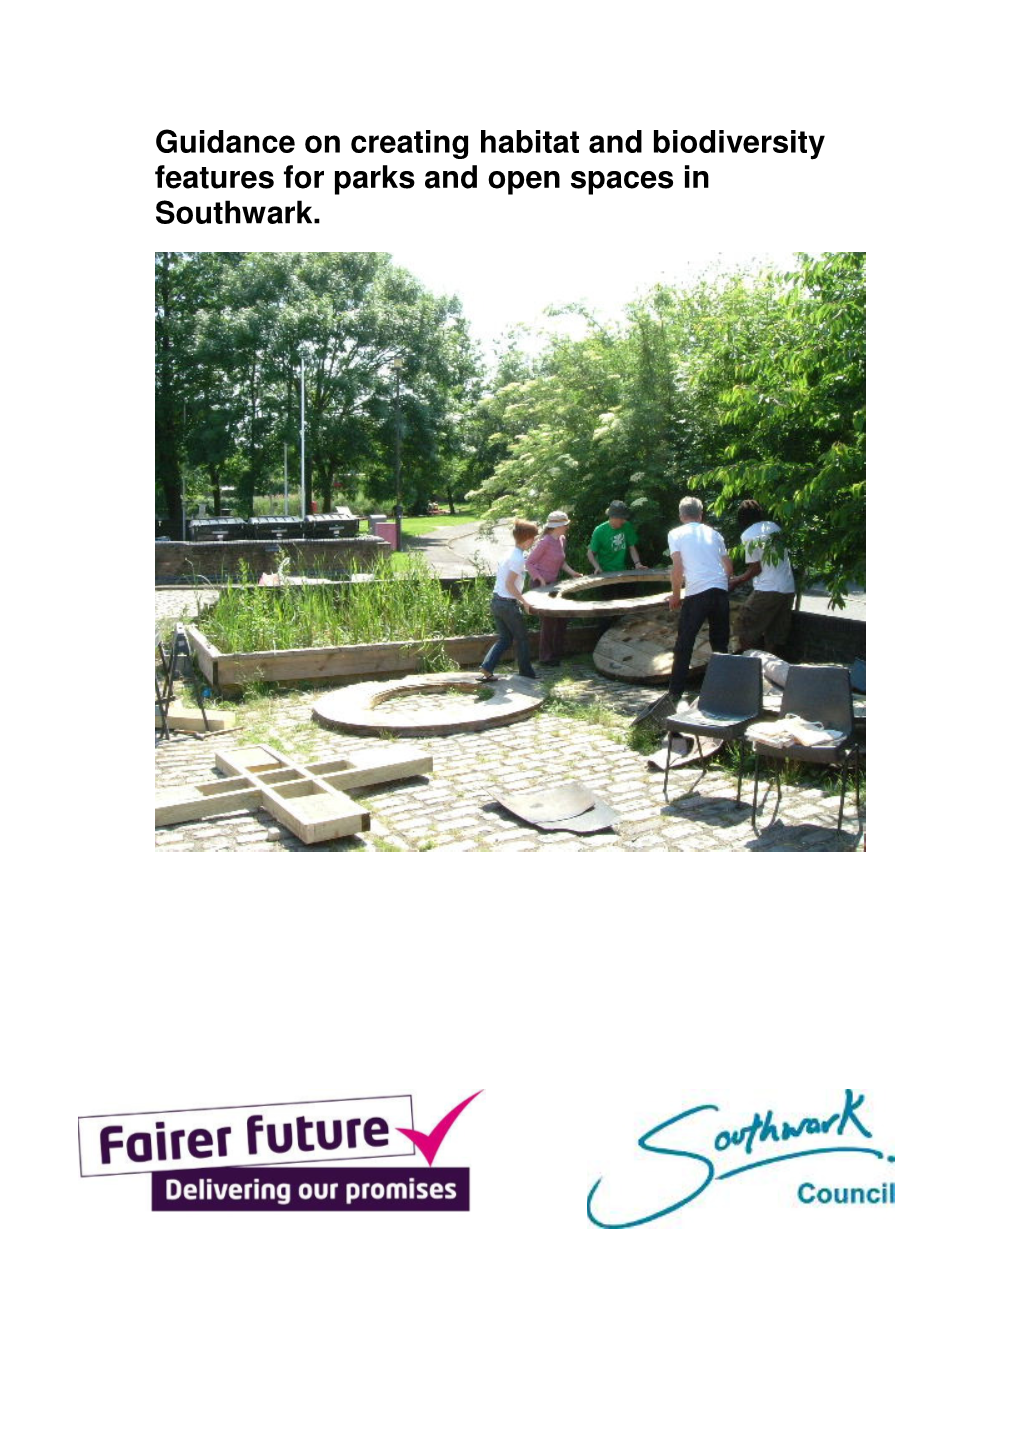 Guidance on Creating Habitat and Biodiversity Features for Parks and Open Spaces in Southwark